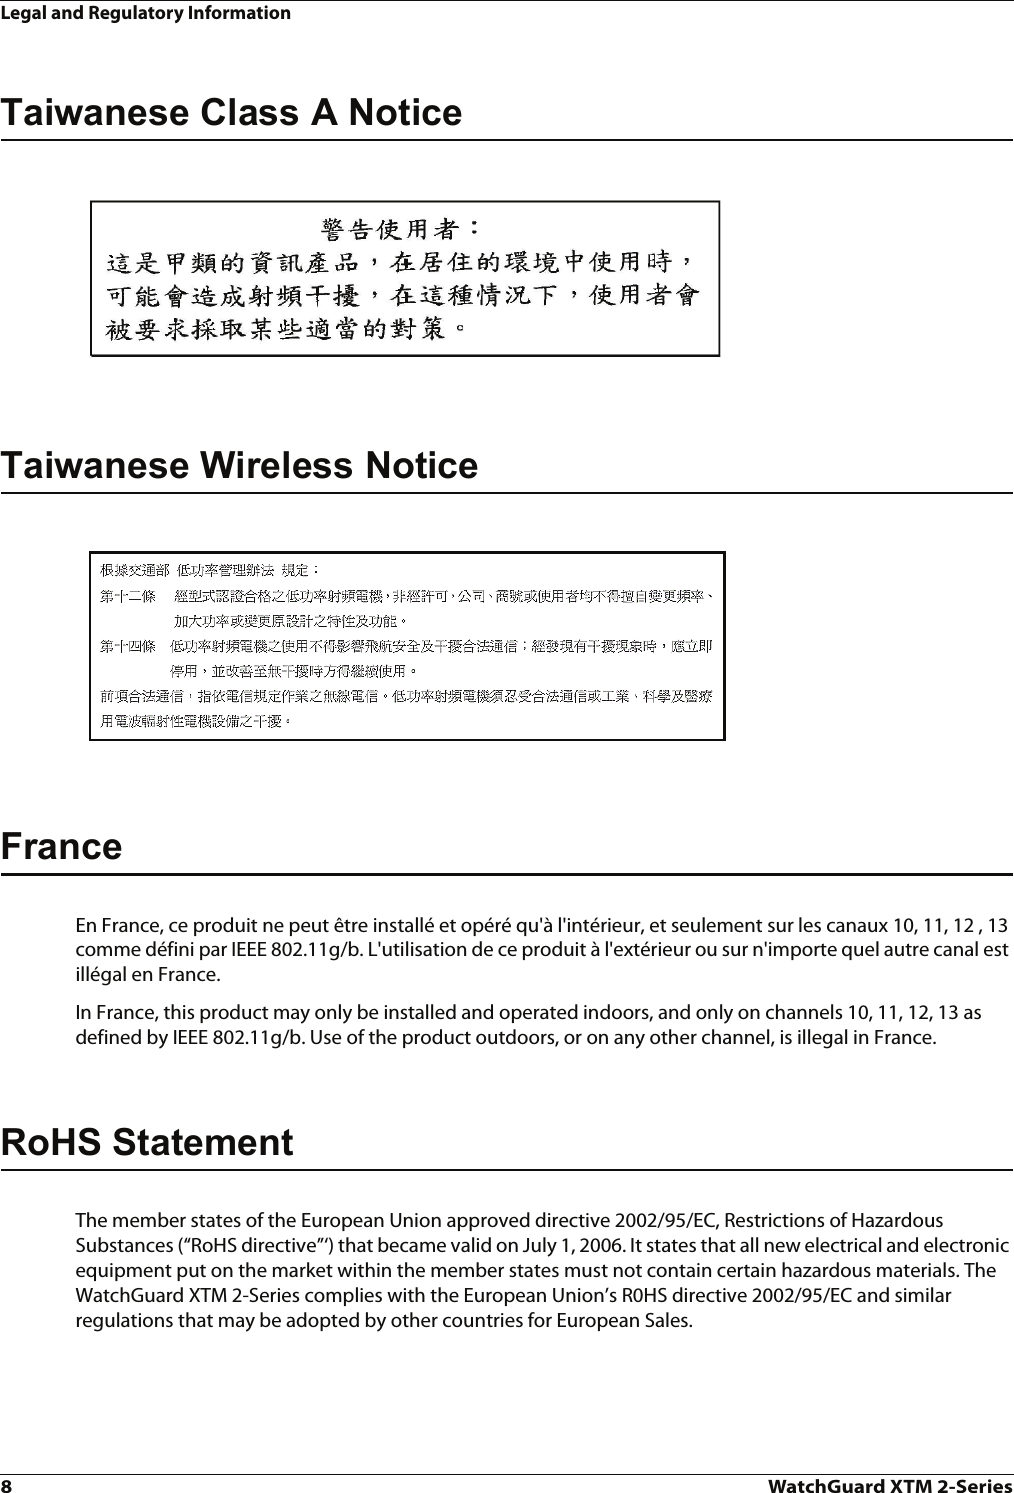 Legal and Regulatory Information8WatchGuard XTM 2-SeriesTaiwanese Class A NoticeTaiwanese Wireless NoticeFranceEn France, ce produit ne peut être installé et opéré qu&apos;à l&apos;intérieur, et seulement sur les canaux 10, 11, 12 , 13 comme défini par IEEE 802.11g/b. L&apos;utilisation de ce produit à l&apos;extérieur ou sur n&apos;importe quel autre canal est illégal en France.In France, this product may only be installed and operated indoors, and only on channels 10, 11, 12, 13 as defined by IEEE 802.11g/b. Use of the product outdoors, or on any other channel, is illegal in France.RoHS StatementThe member states of the European Union approved directive 2002/95/EC, Restrictions of Hazardous Substances (“RoHS directive”‘) that became valid on July 1, 2006. It states that all new electrical and electronic equipment put on the market within the member states must not contain certain hazardous materials. The WatchGuard XTM 2-Series complies with the European Union’s R0HS directive 2002/95/EC and similar regulations that may be adopted by other countries for European Sales. 